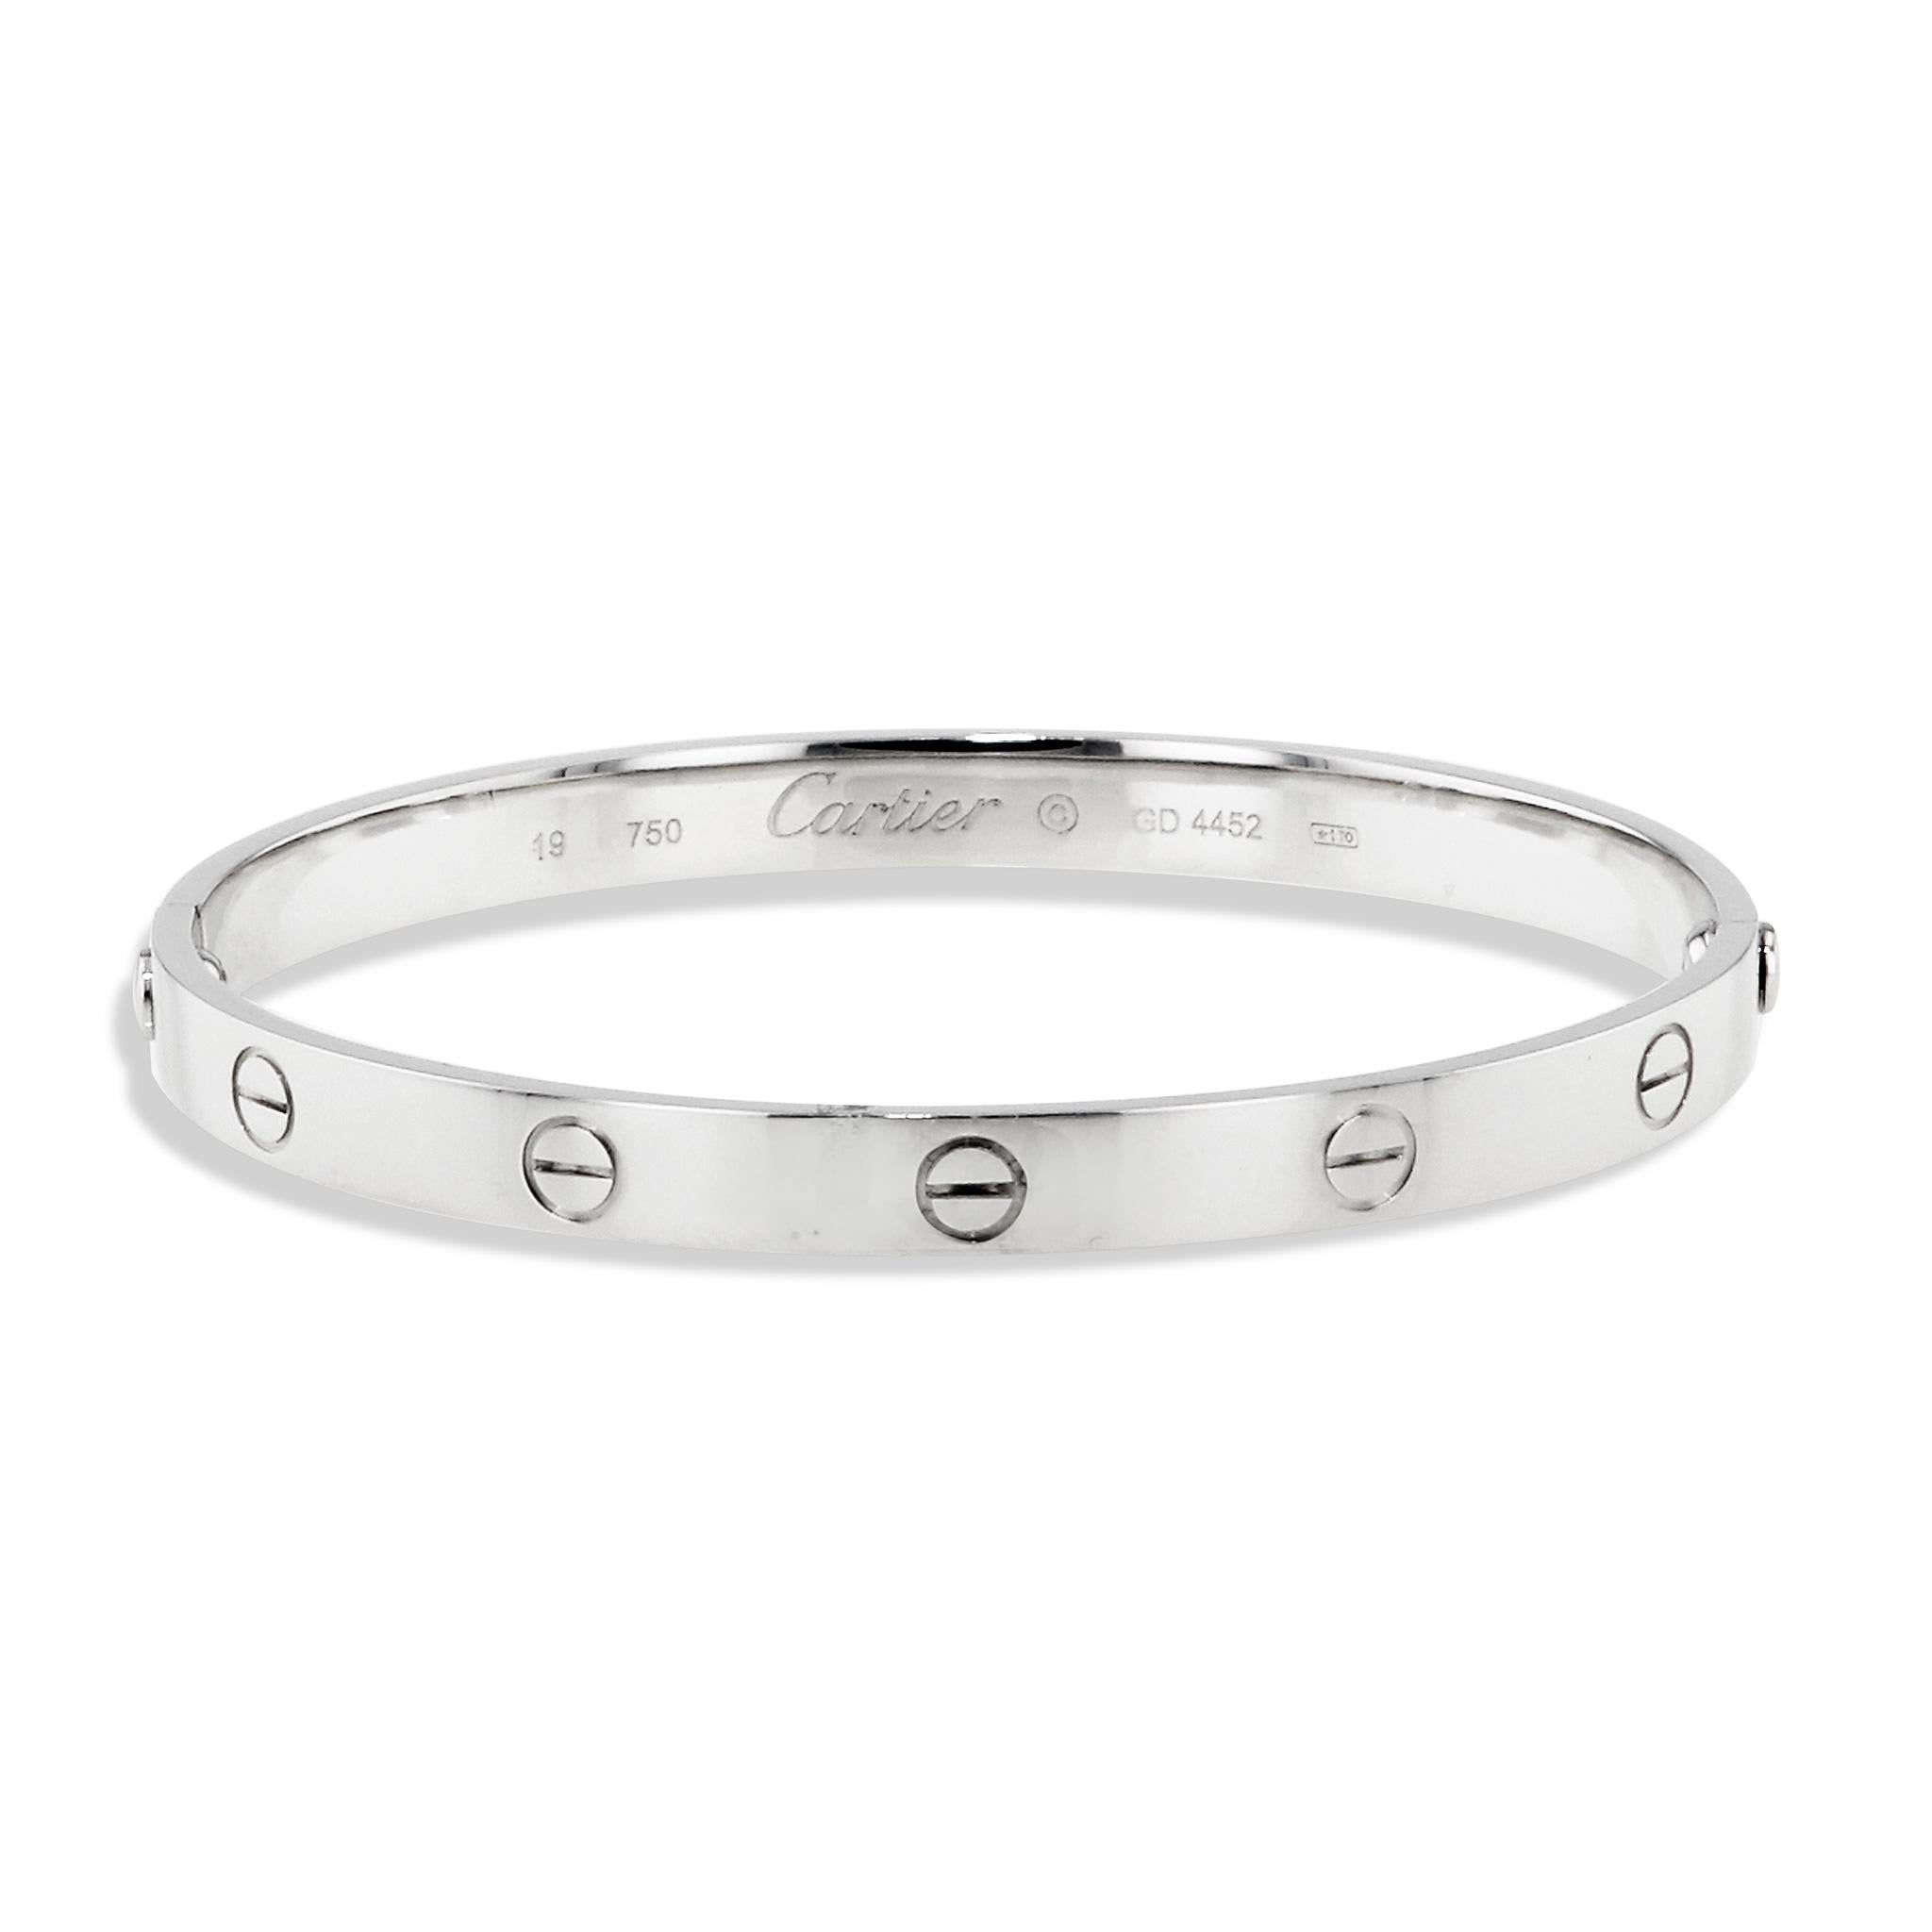 This classic Cartier Love Bracelet is a timeless statement piece. 
Crafted in 18 karat white gold, this estate bracelet is engraved with the iconic Cartier logo and GO 4452. 
The size 19 bracelet's classic design ensures it will never go out of